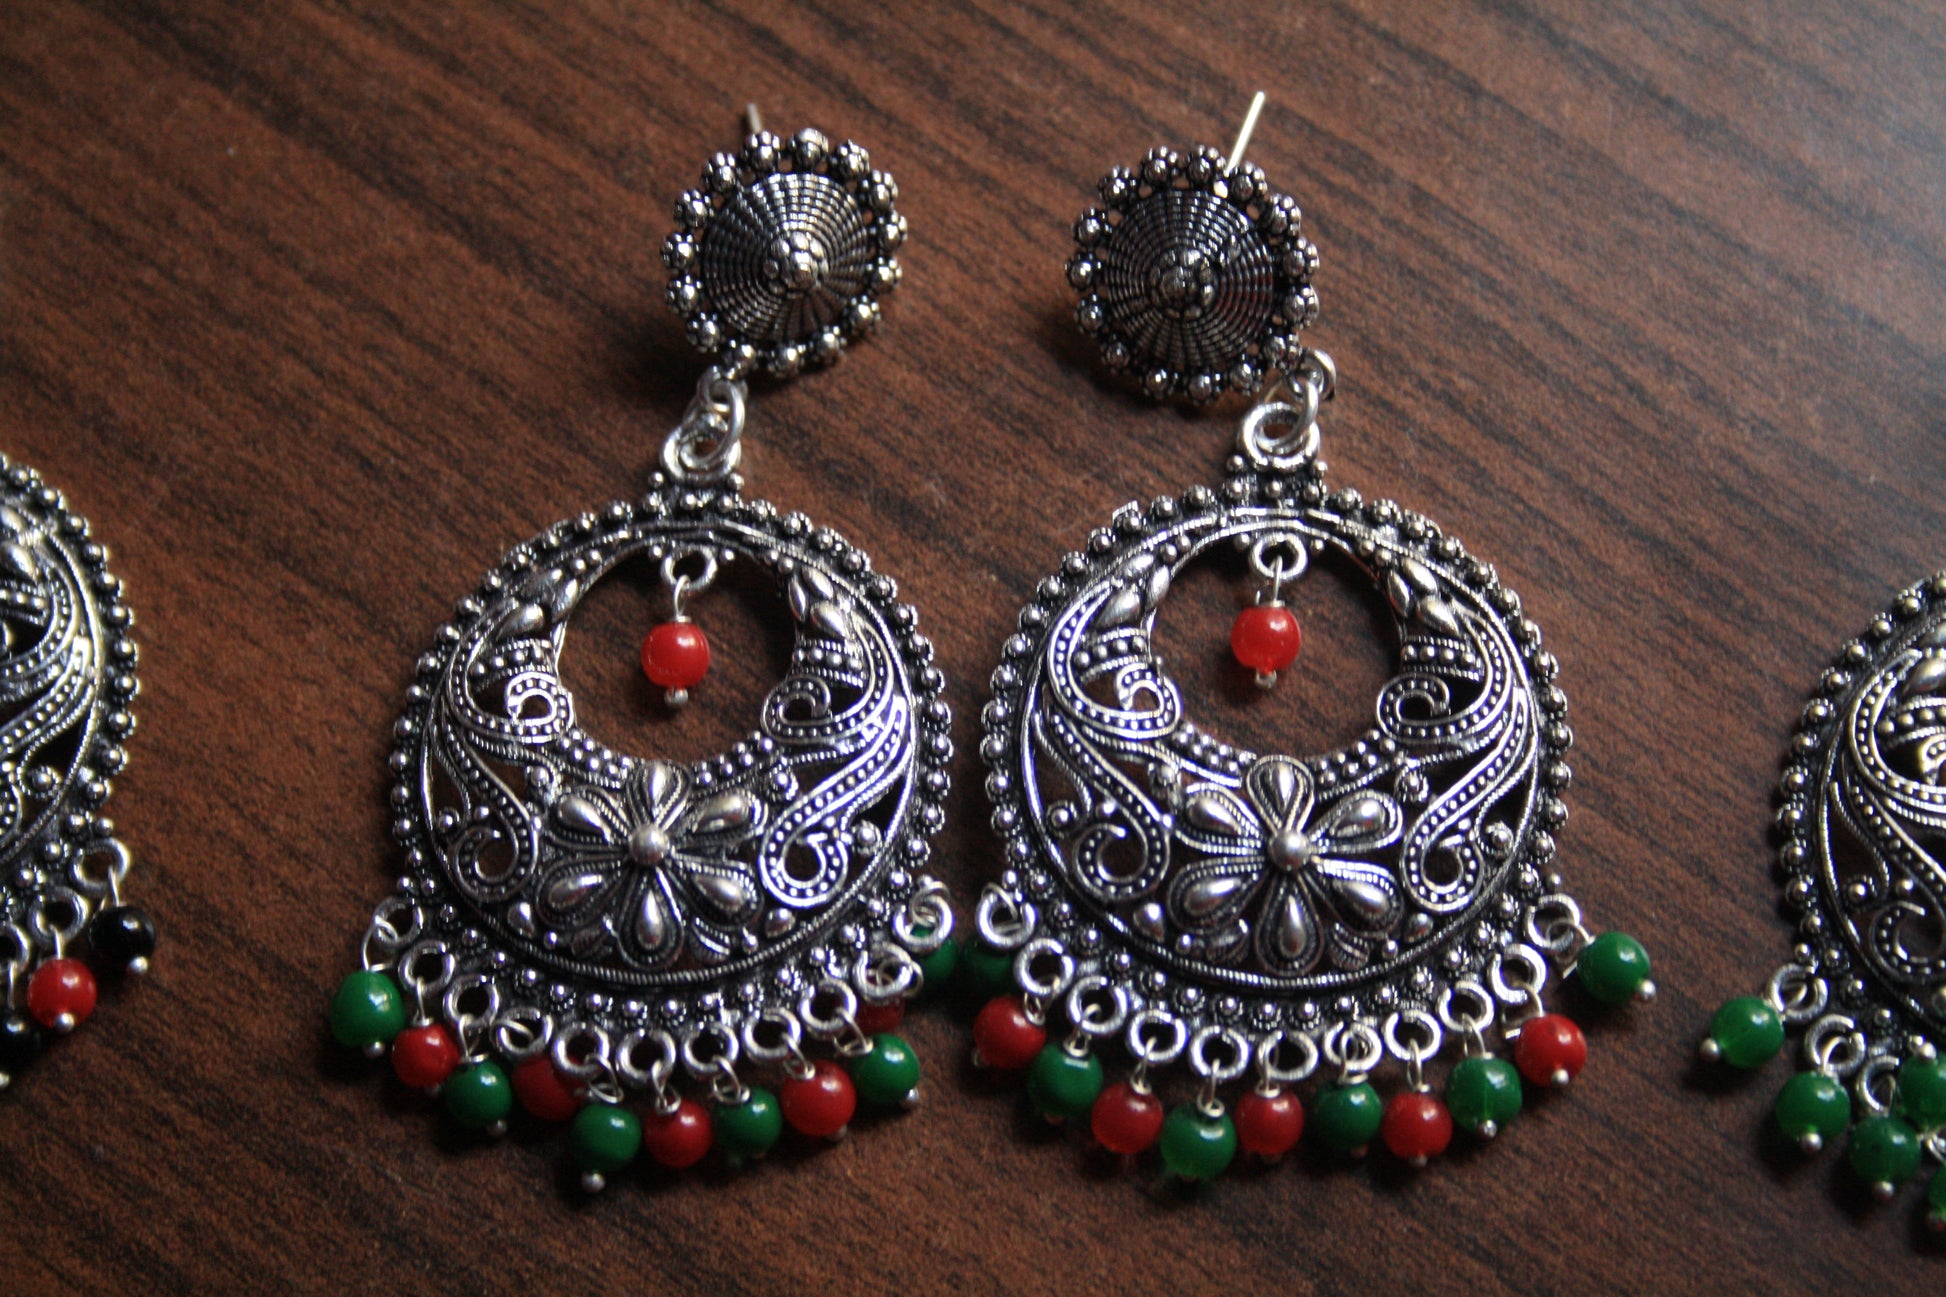 Large Silver Oxidized Boondi Stud Earings with Colored Beads - GlitterGleam